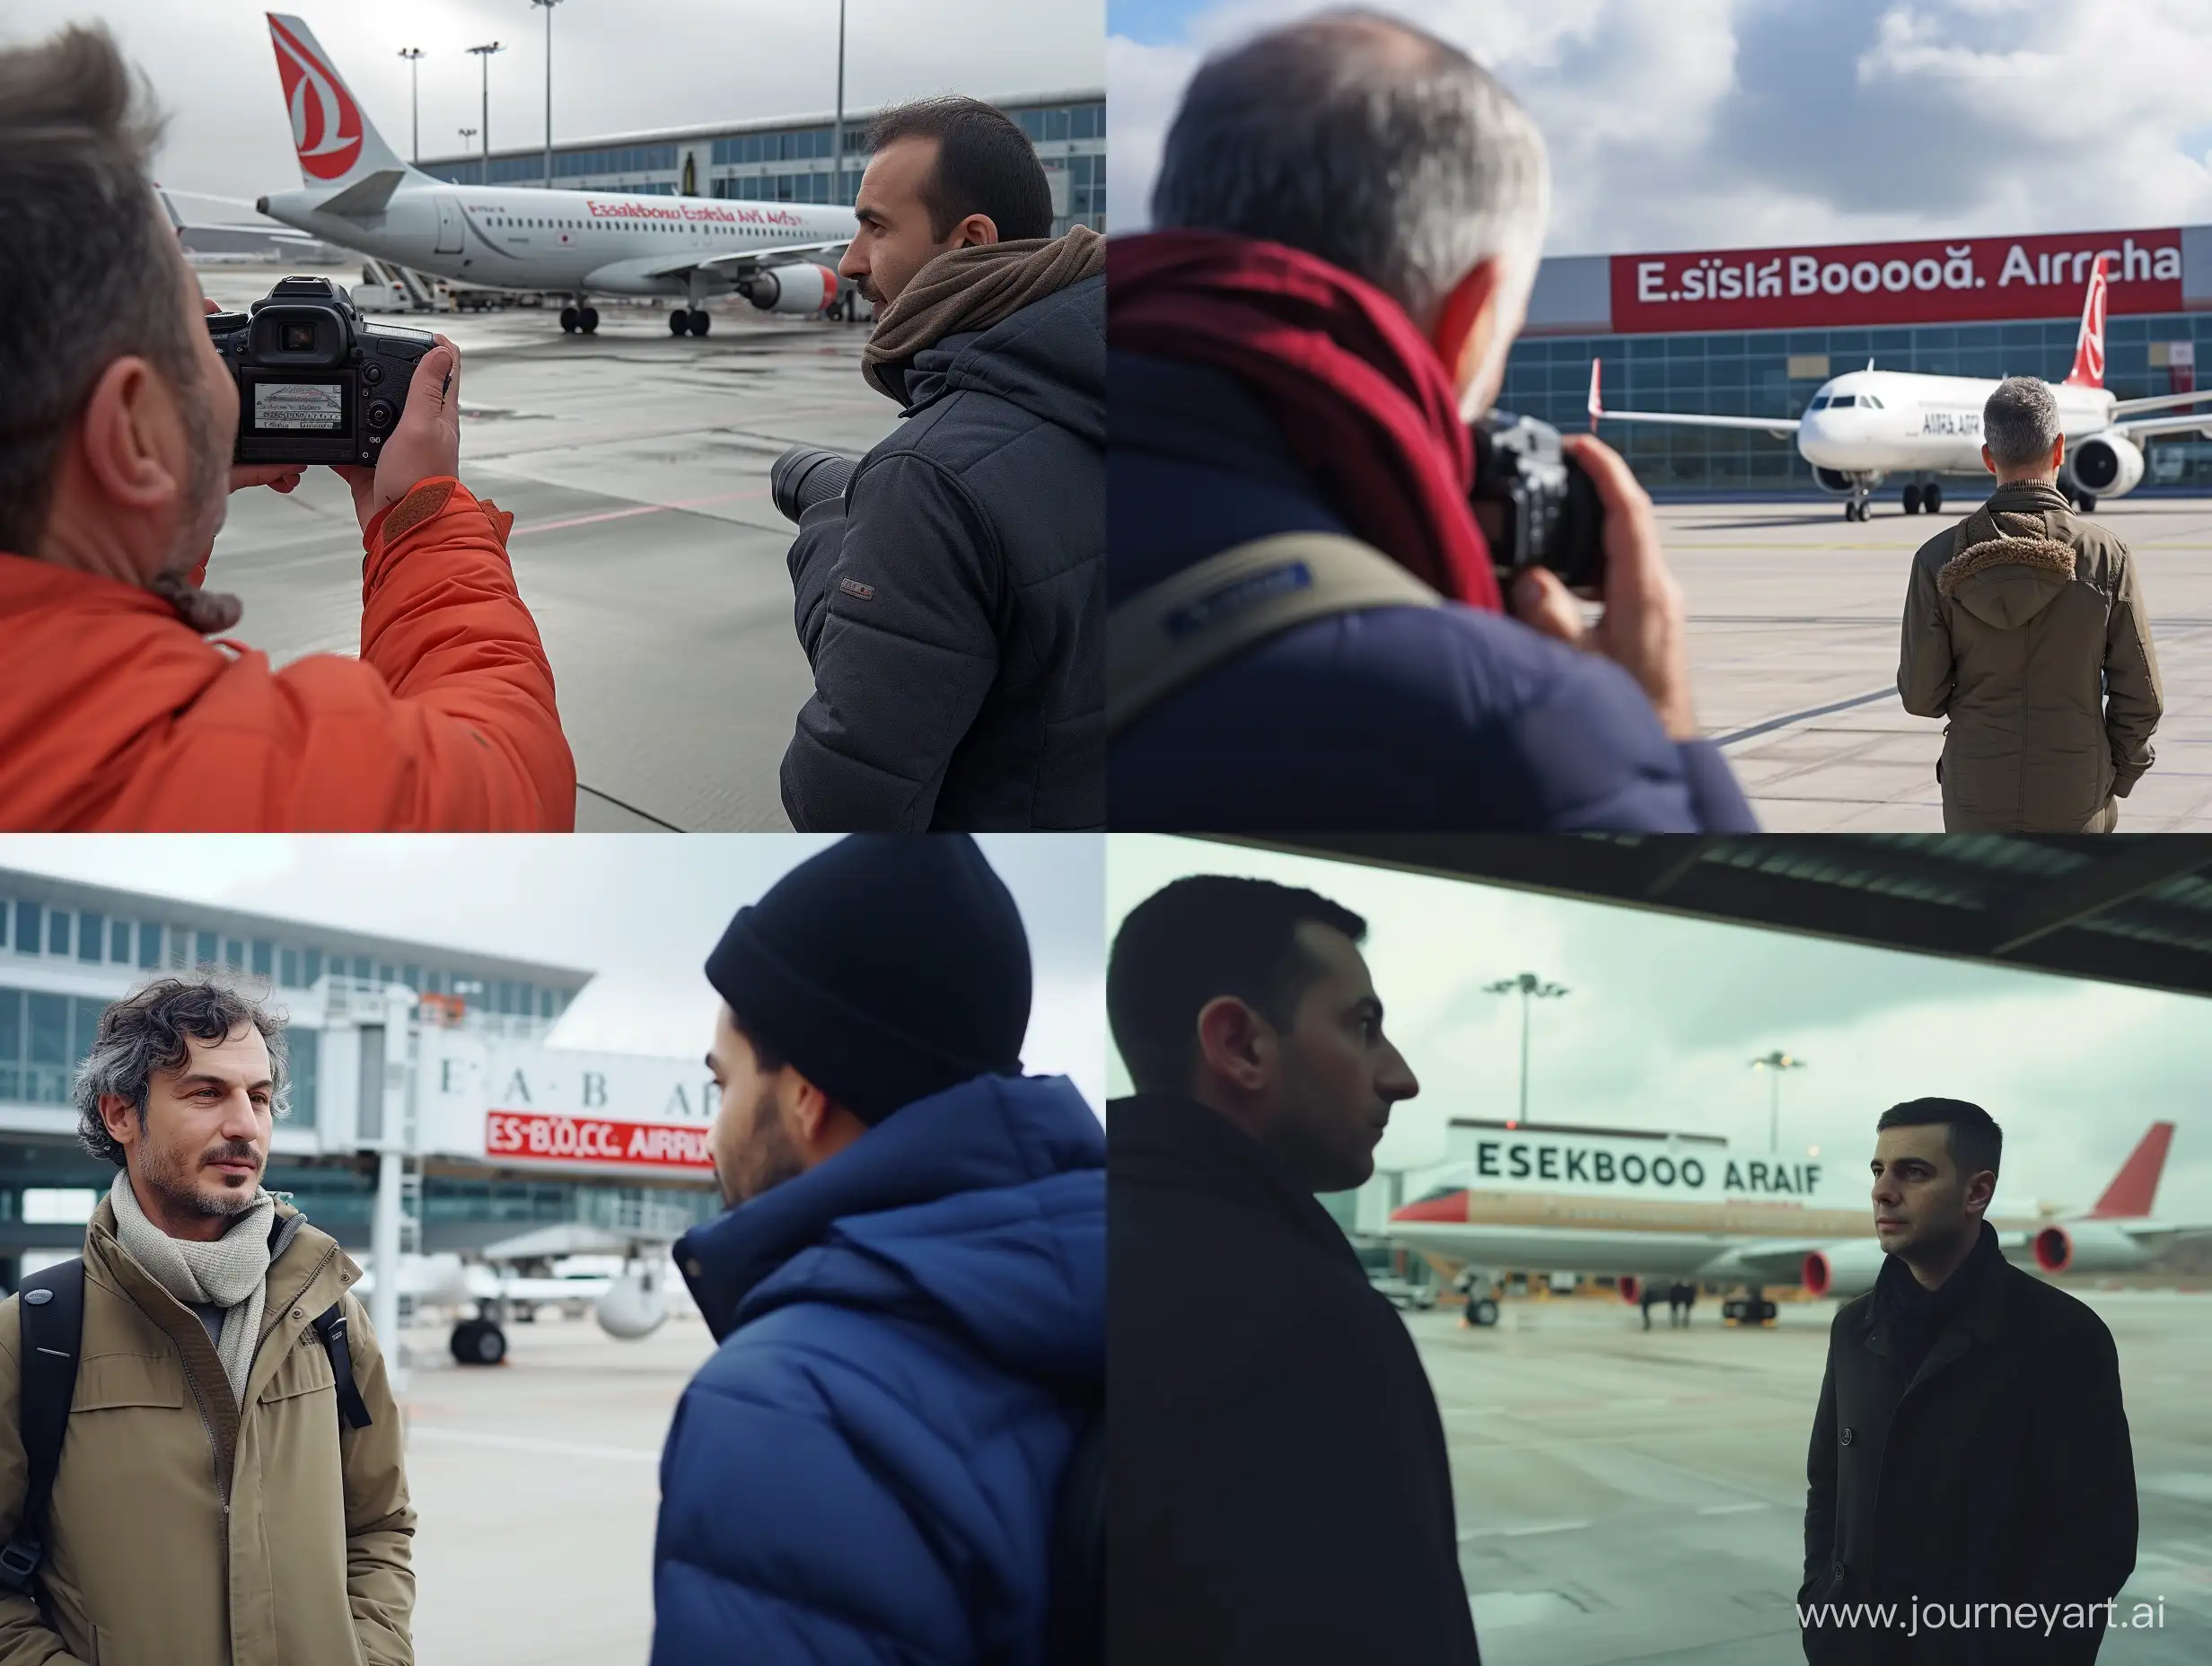 Take the photo with a Nikon camera. Let it be quite realistic. Make it look like you shot it with a professional camera. Let a man meet a man at Ankara Esenboğa Airport. Let the text Esenboğa Airport and the passenger plane appear in the background.